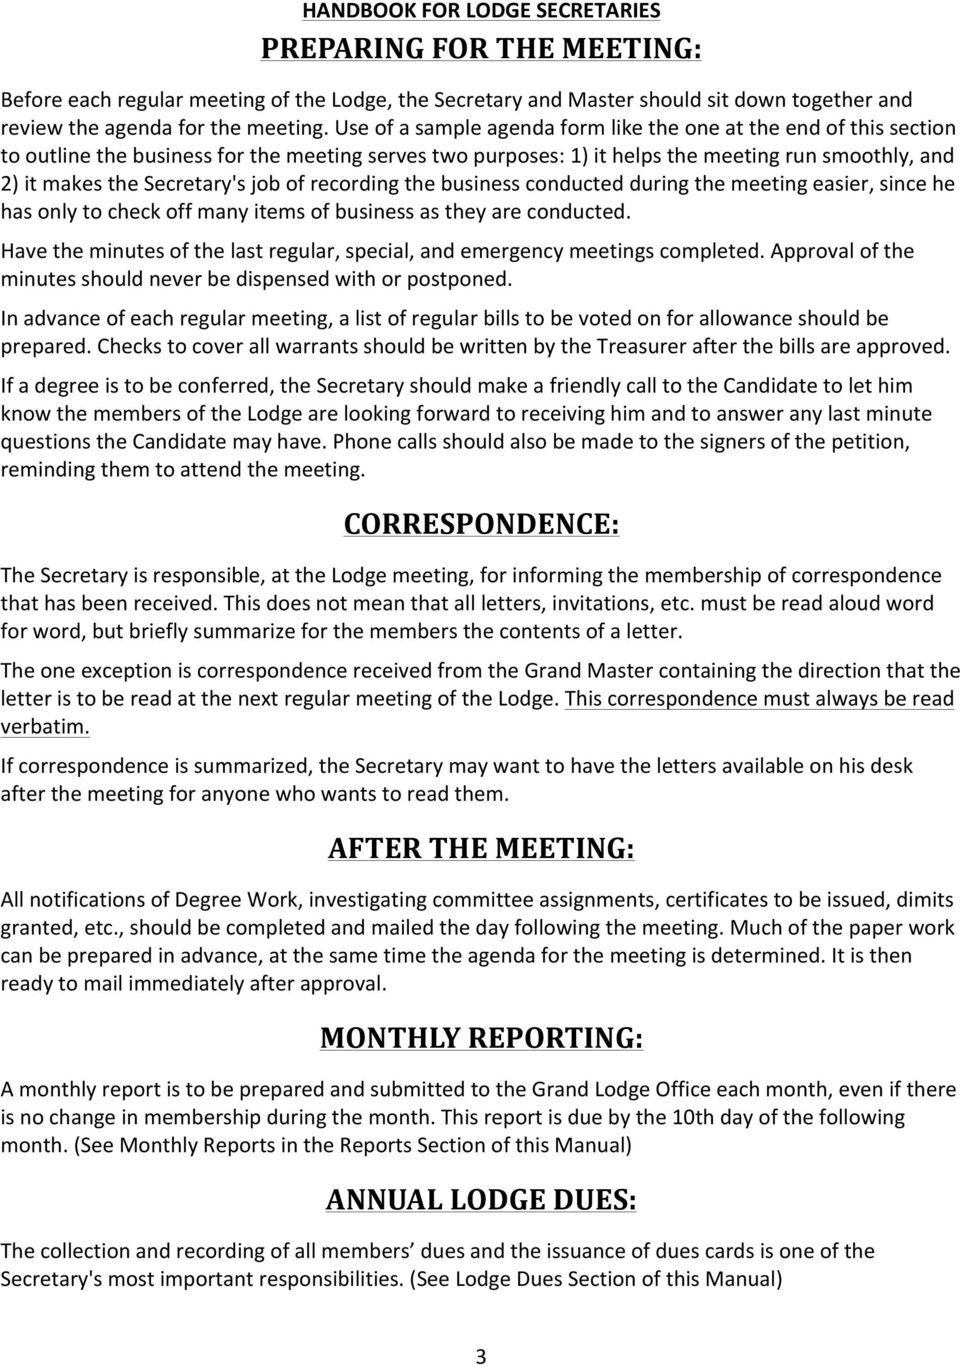 Masonic Meeting Minutes Template in proportions 960 X 1367